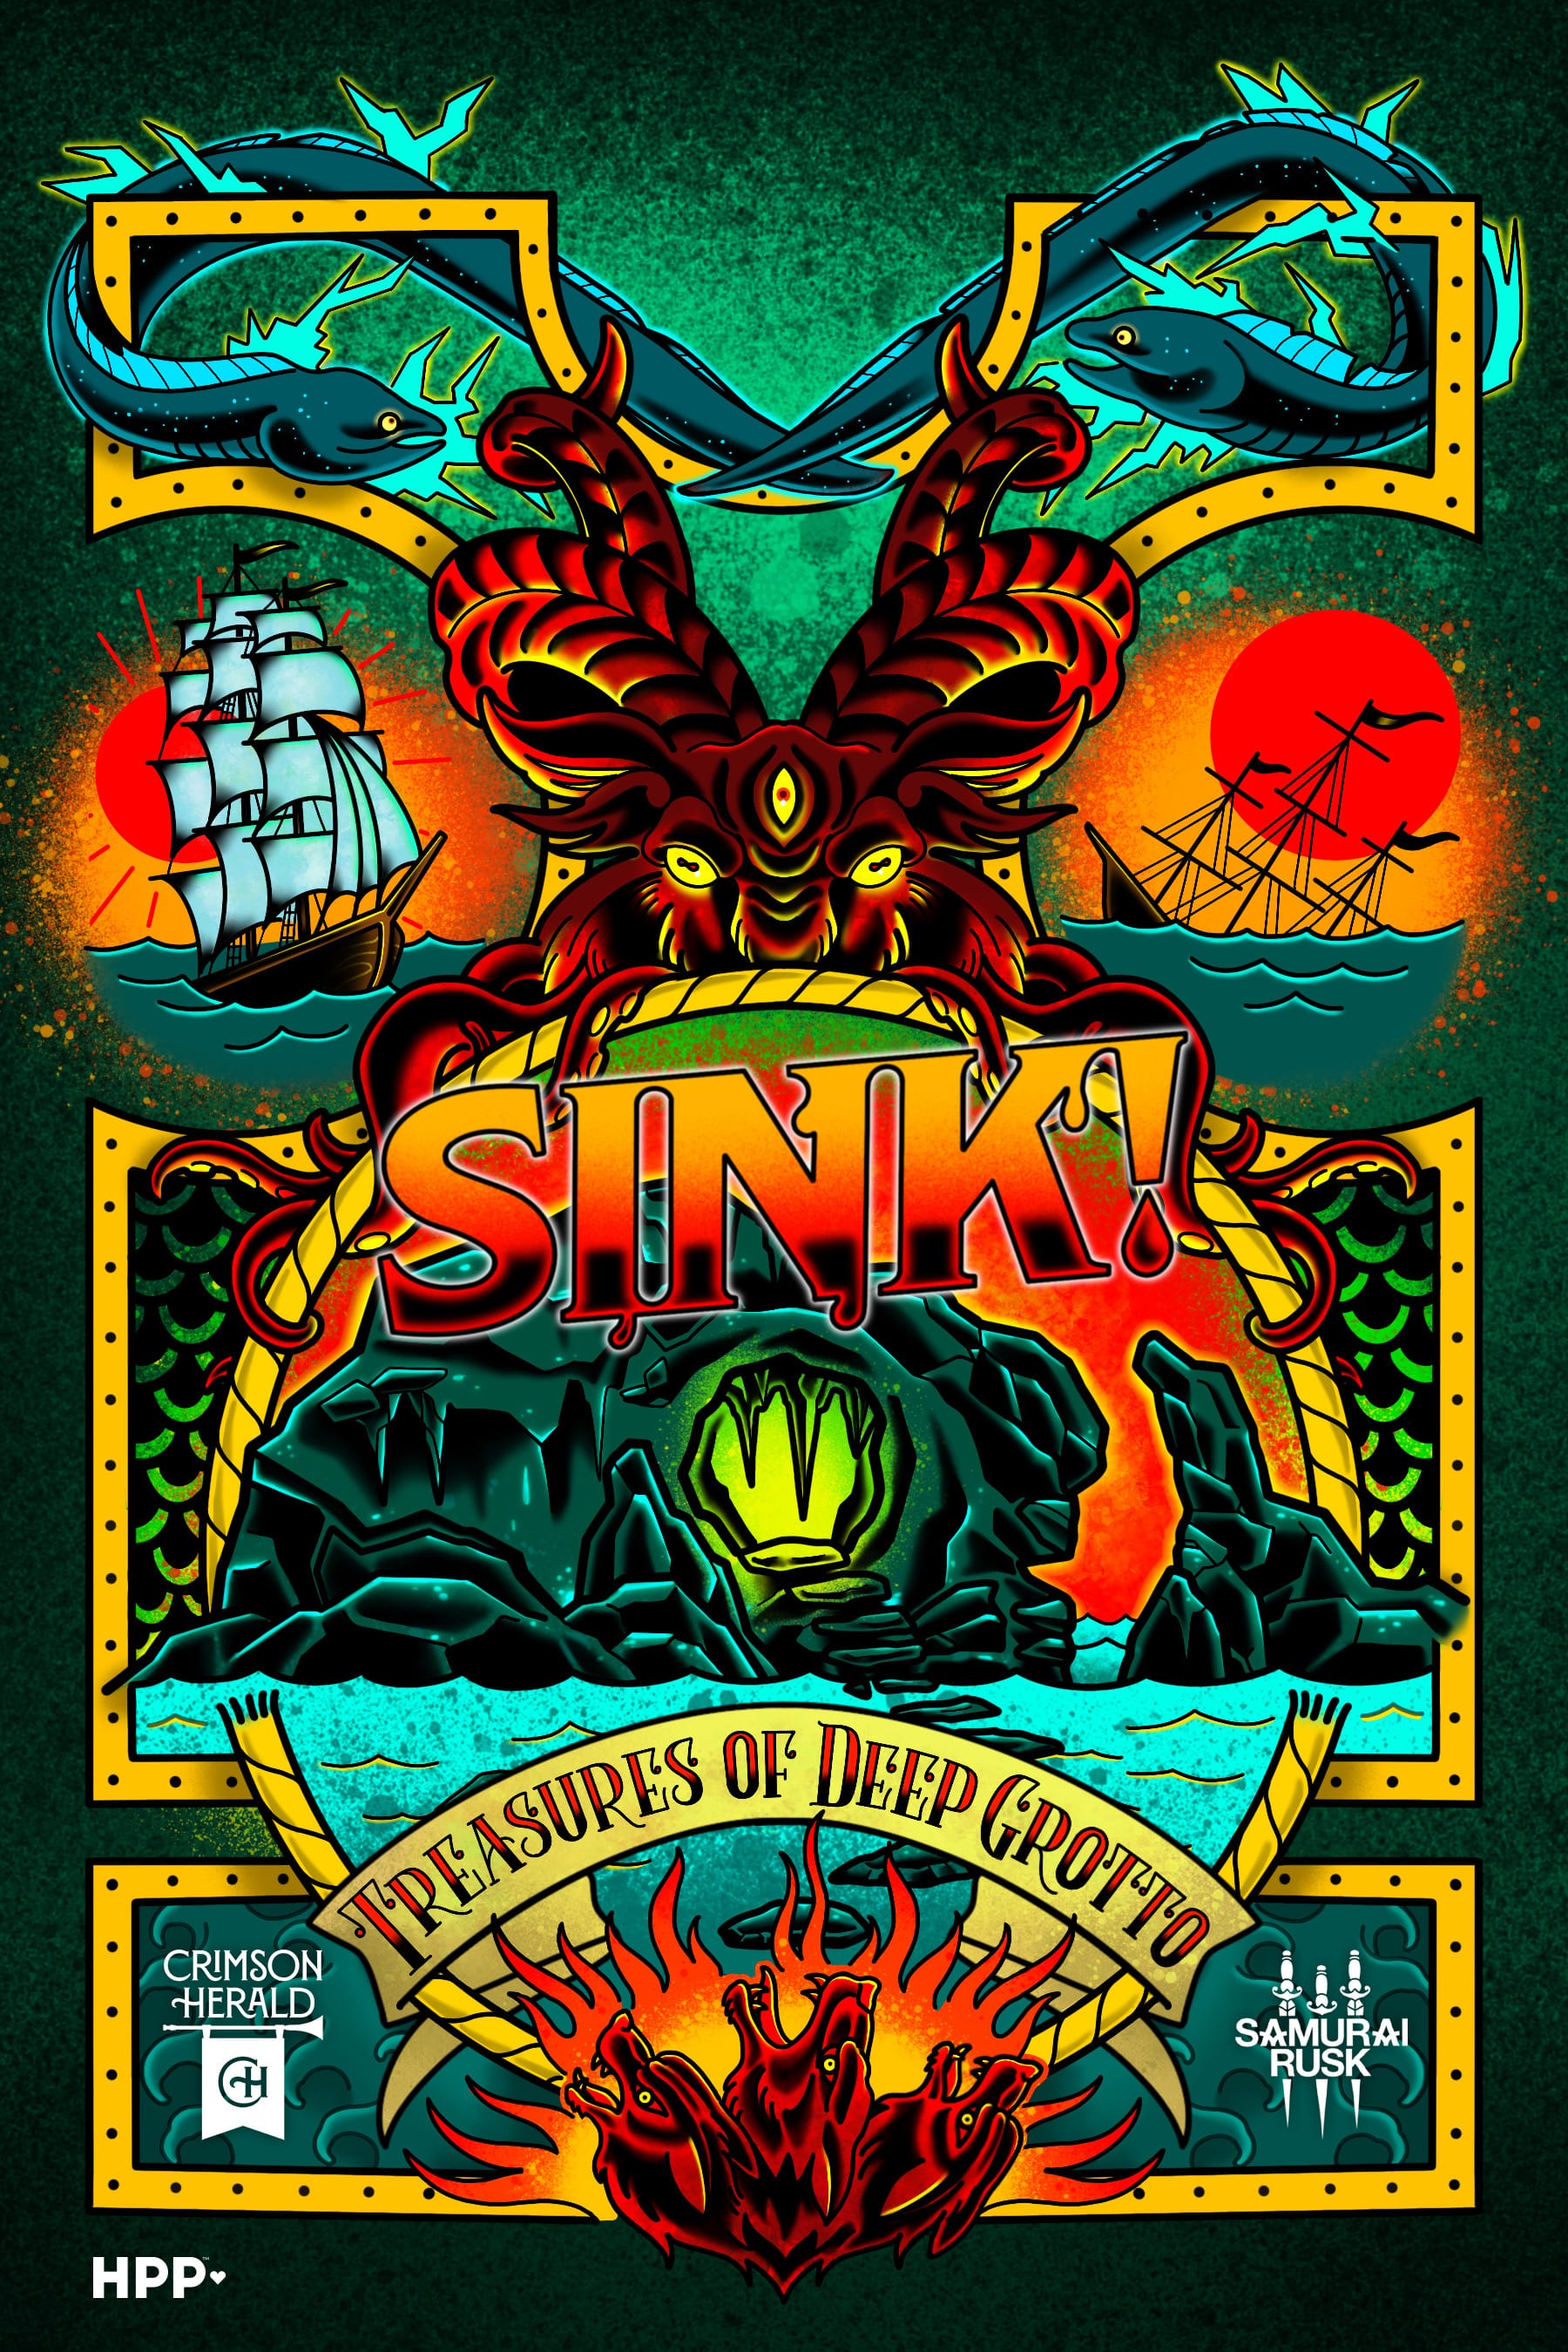 Cover of SINK!: Treasures of Deep Grotto, featuring a dark island that resembles a half exposed skull with a light exposing its entrance, a demonic head hovering over it, tentacles outstretched, two ships (one of them sinking), and two eels at the top. The layout of the artwork resembles a full back tattoo piece in the American traditional tattoo style.